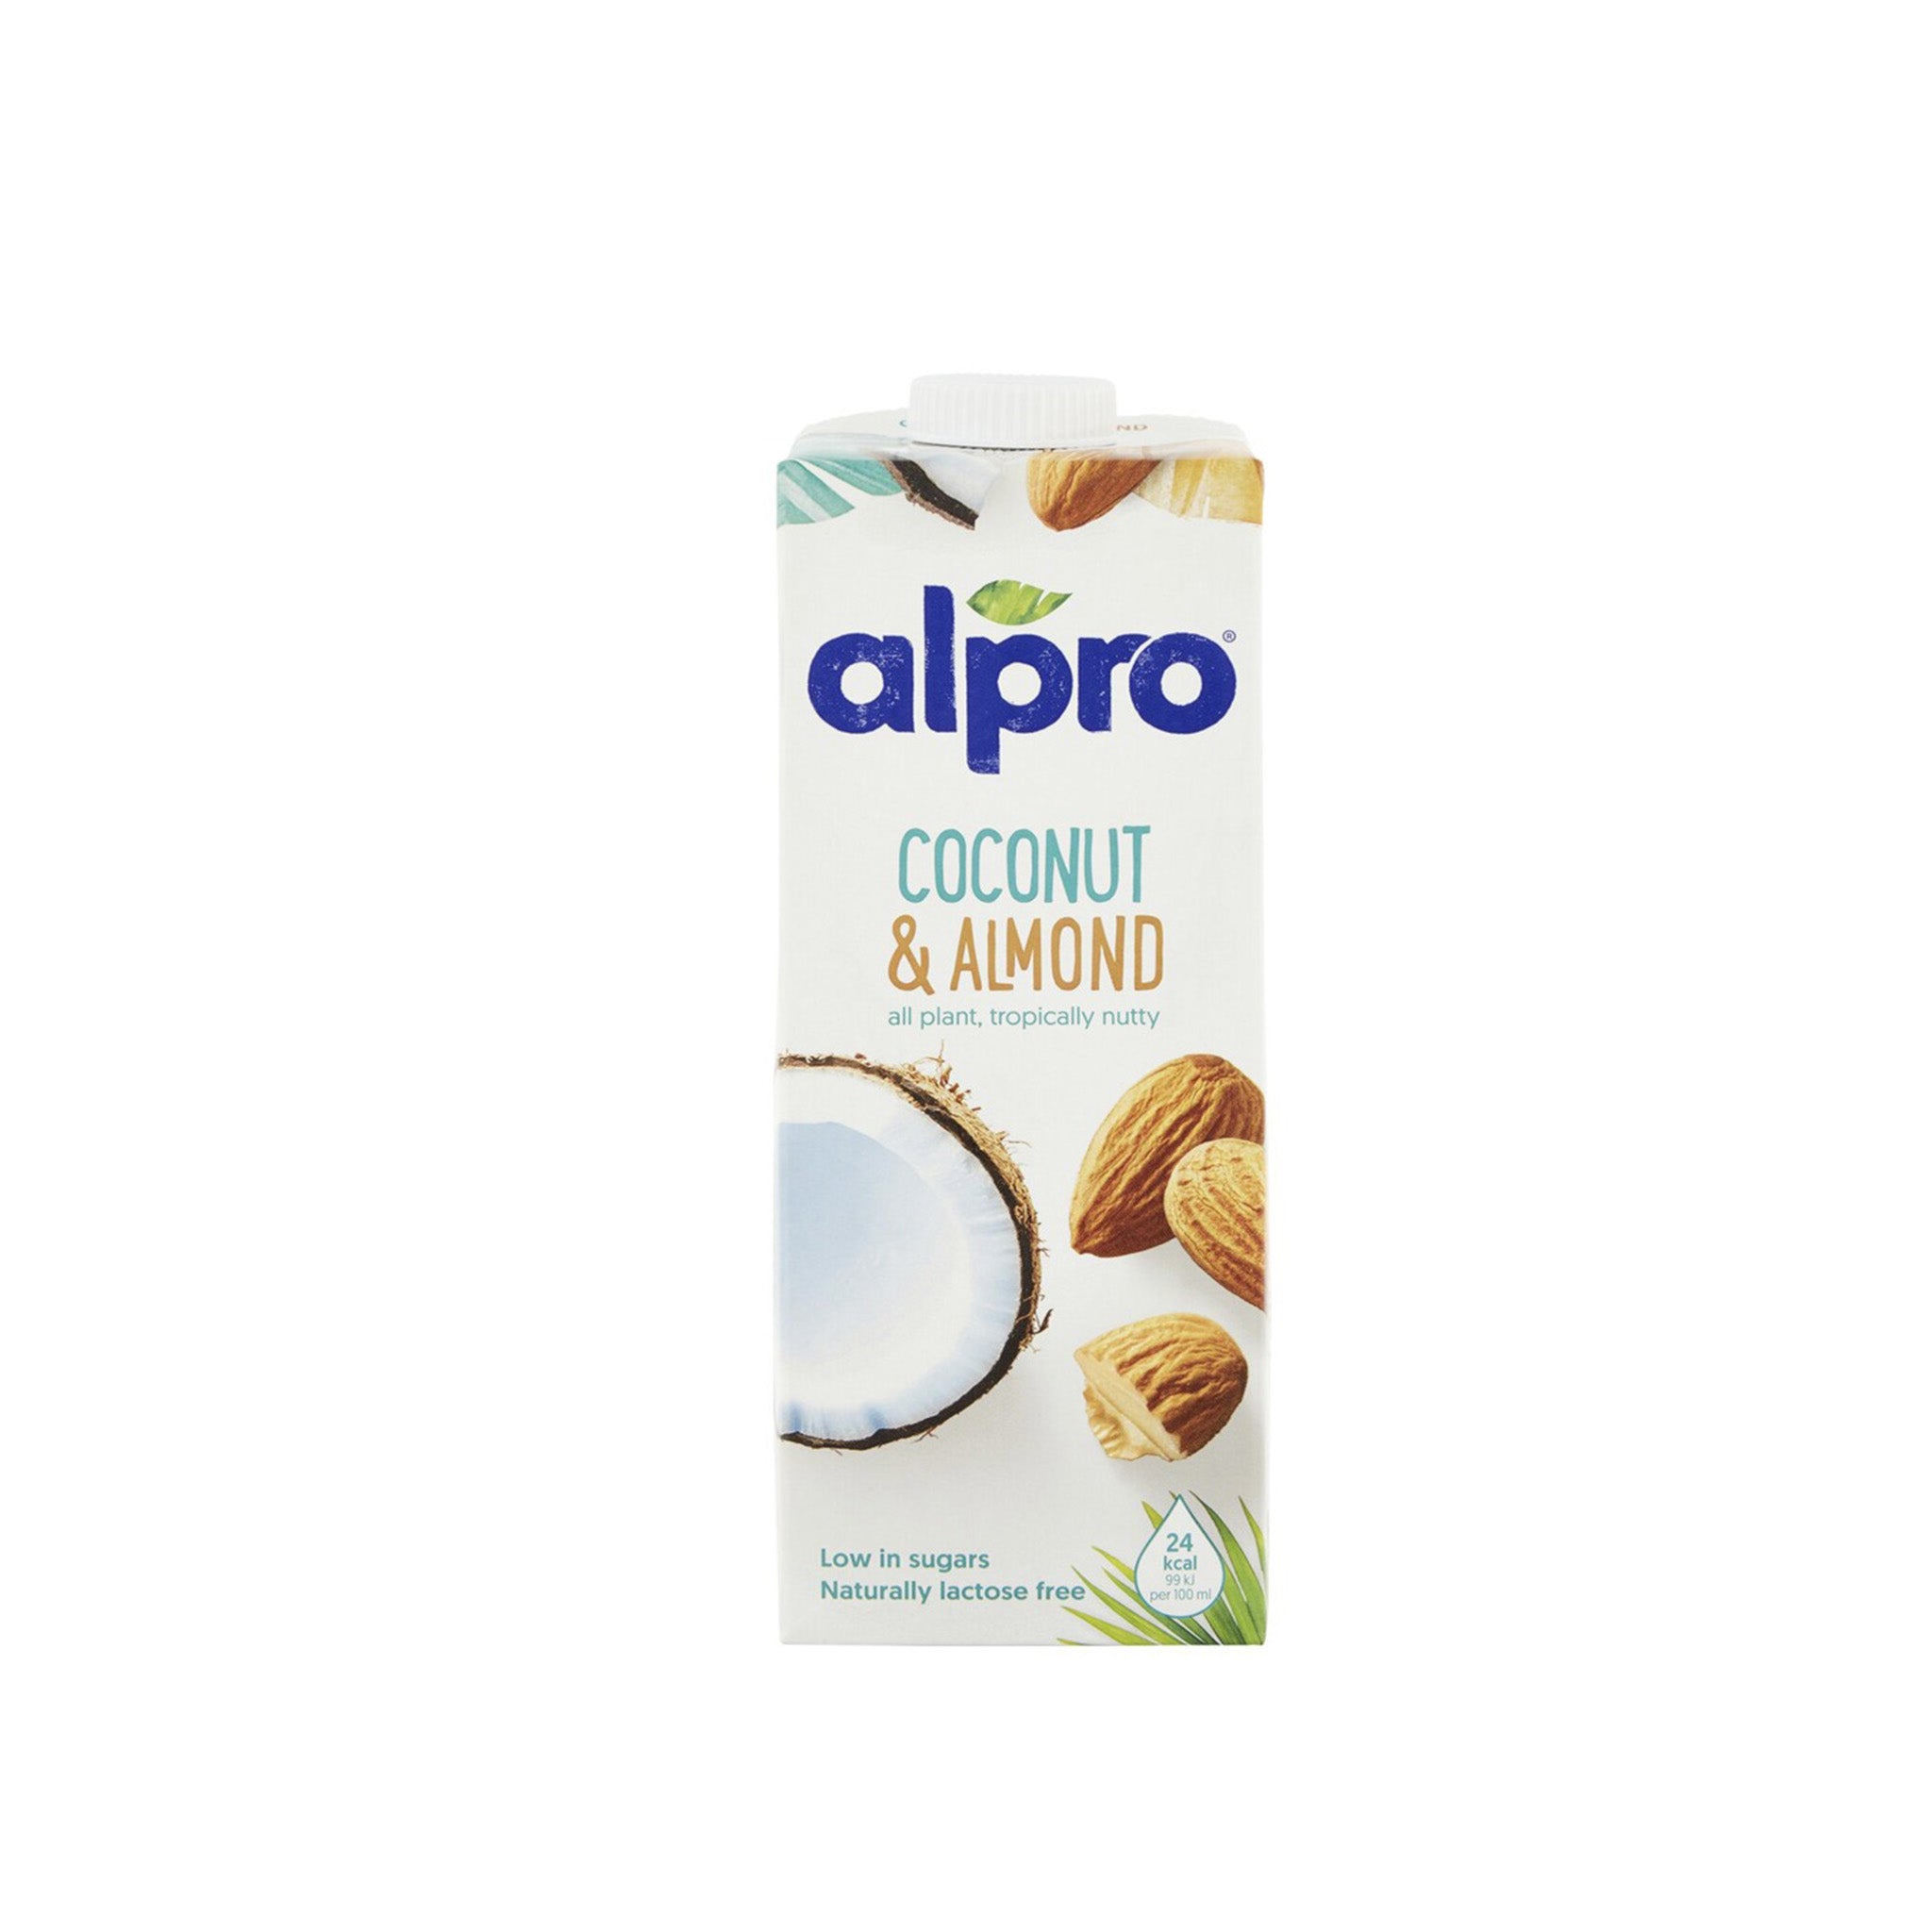 Alpro Drink Coconut & Almond All Plant Tropically Nutty 1L